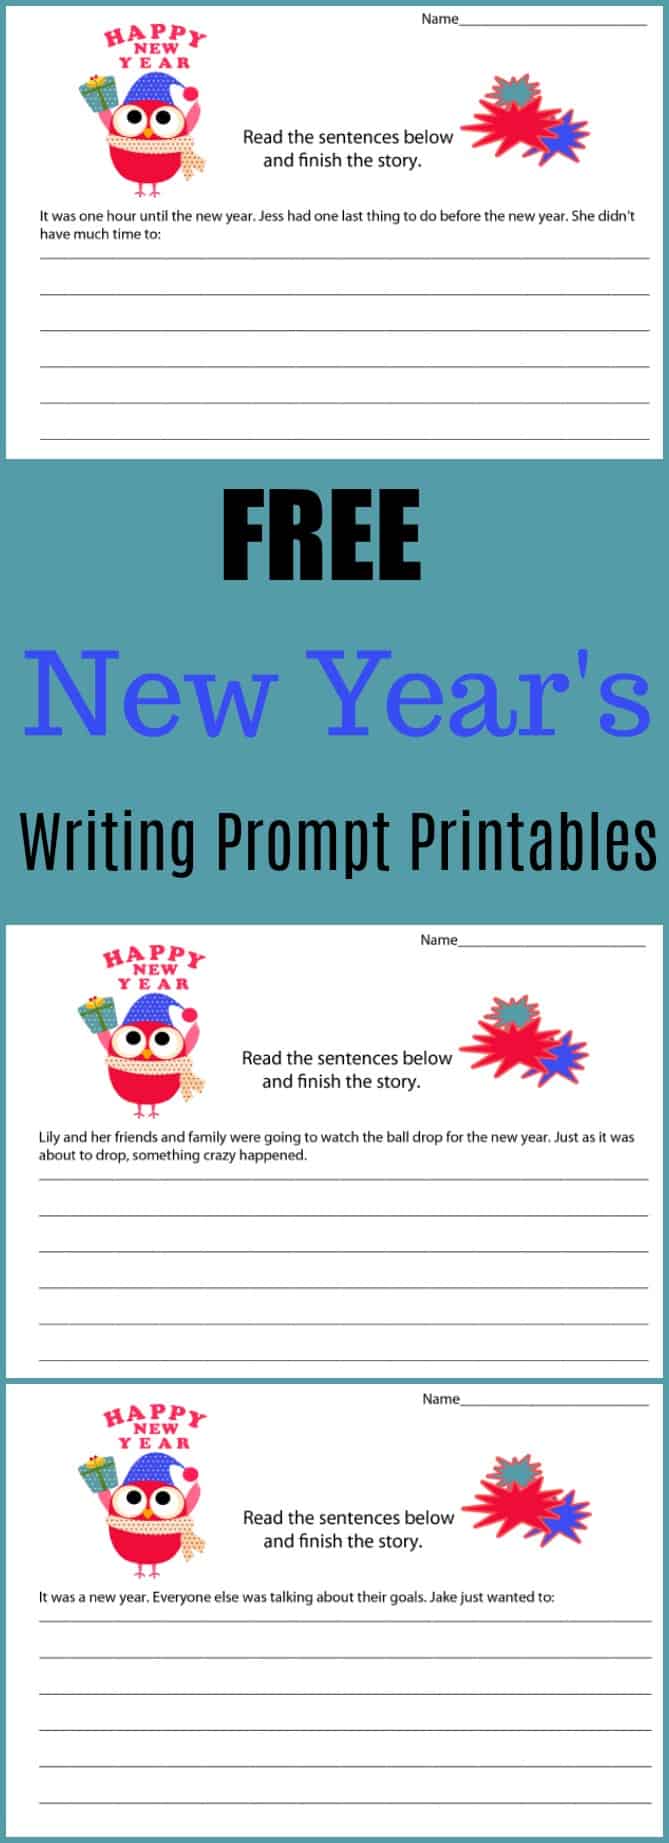 New Year's Even Holiday Writing Prompt Printables #writing #writingprompt #holiday #printable #freeprintable #education #edchat #homeschool #homeschooling #newyearseve